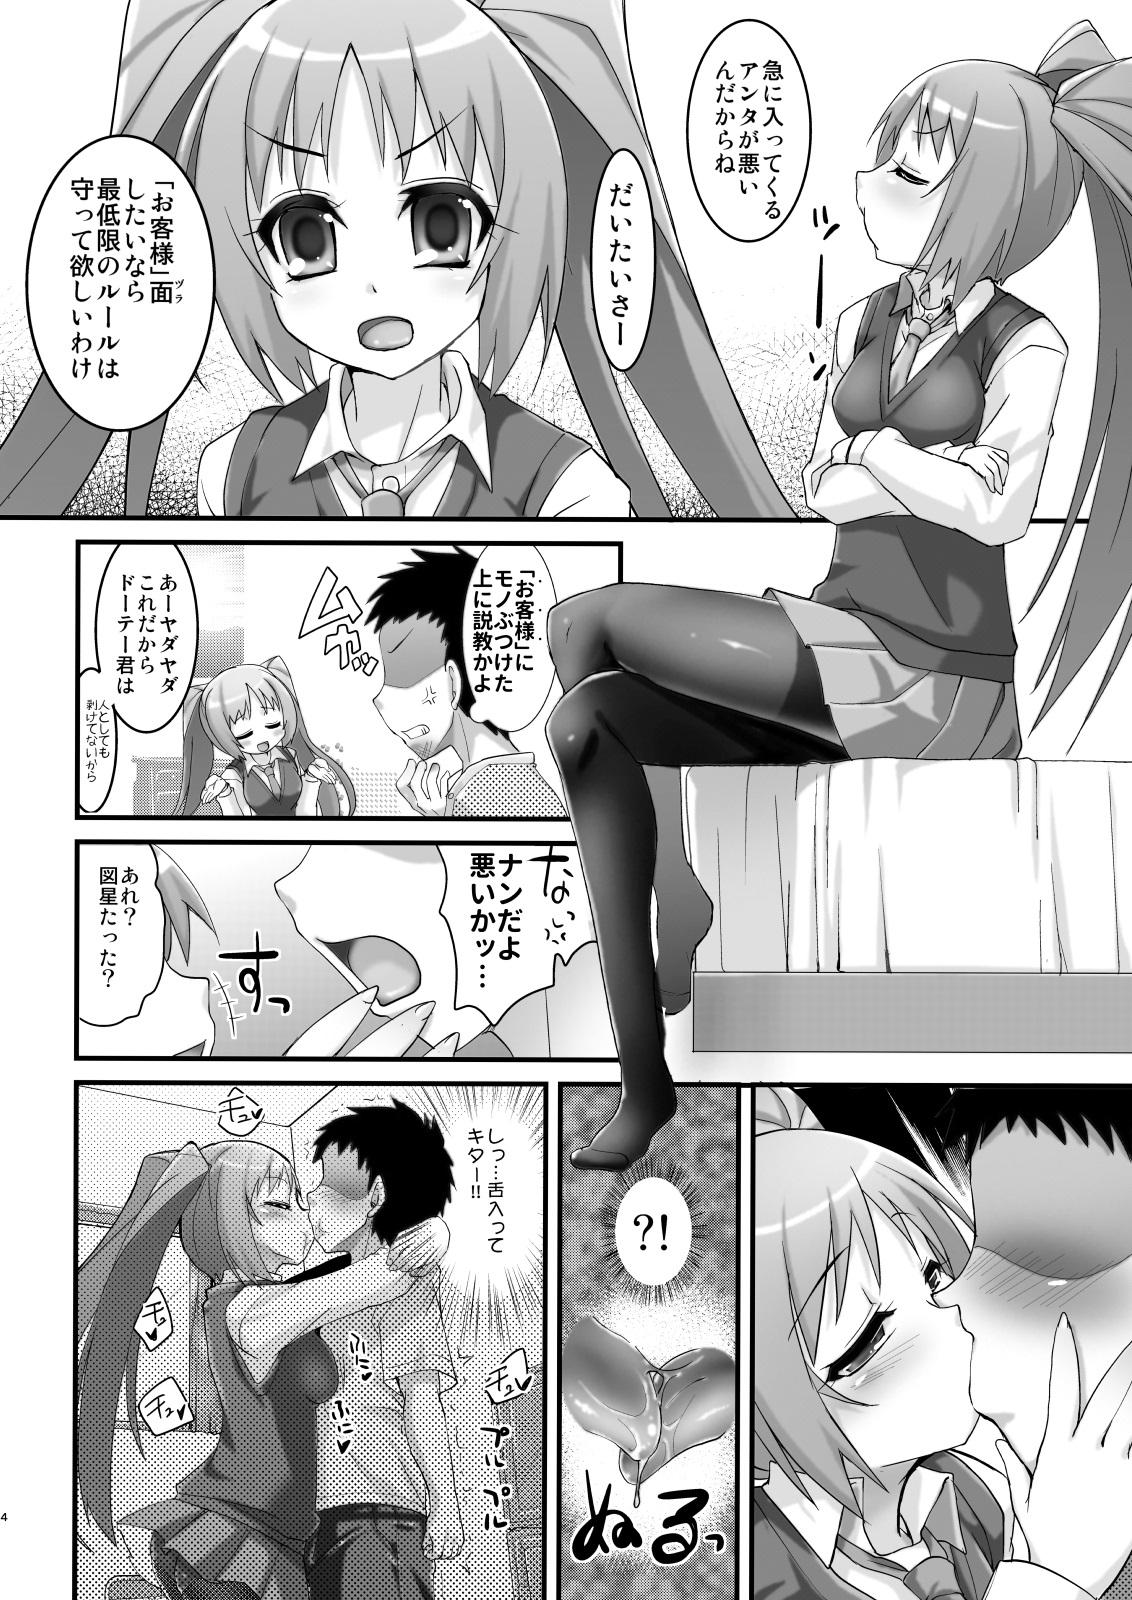 Girl Tsundere Tights to Twintails - Original Futa - Page 4